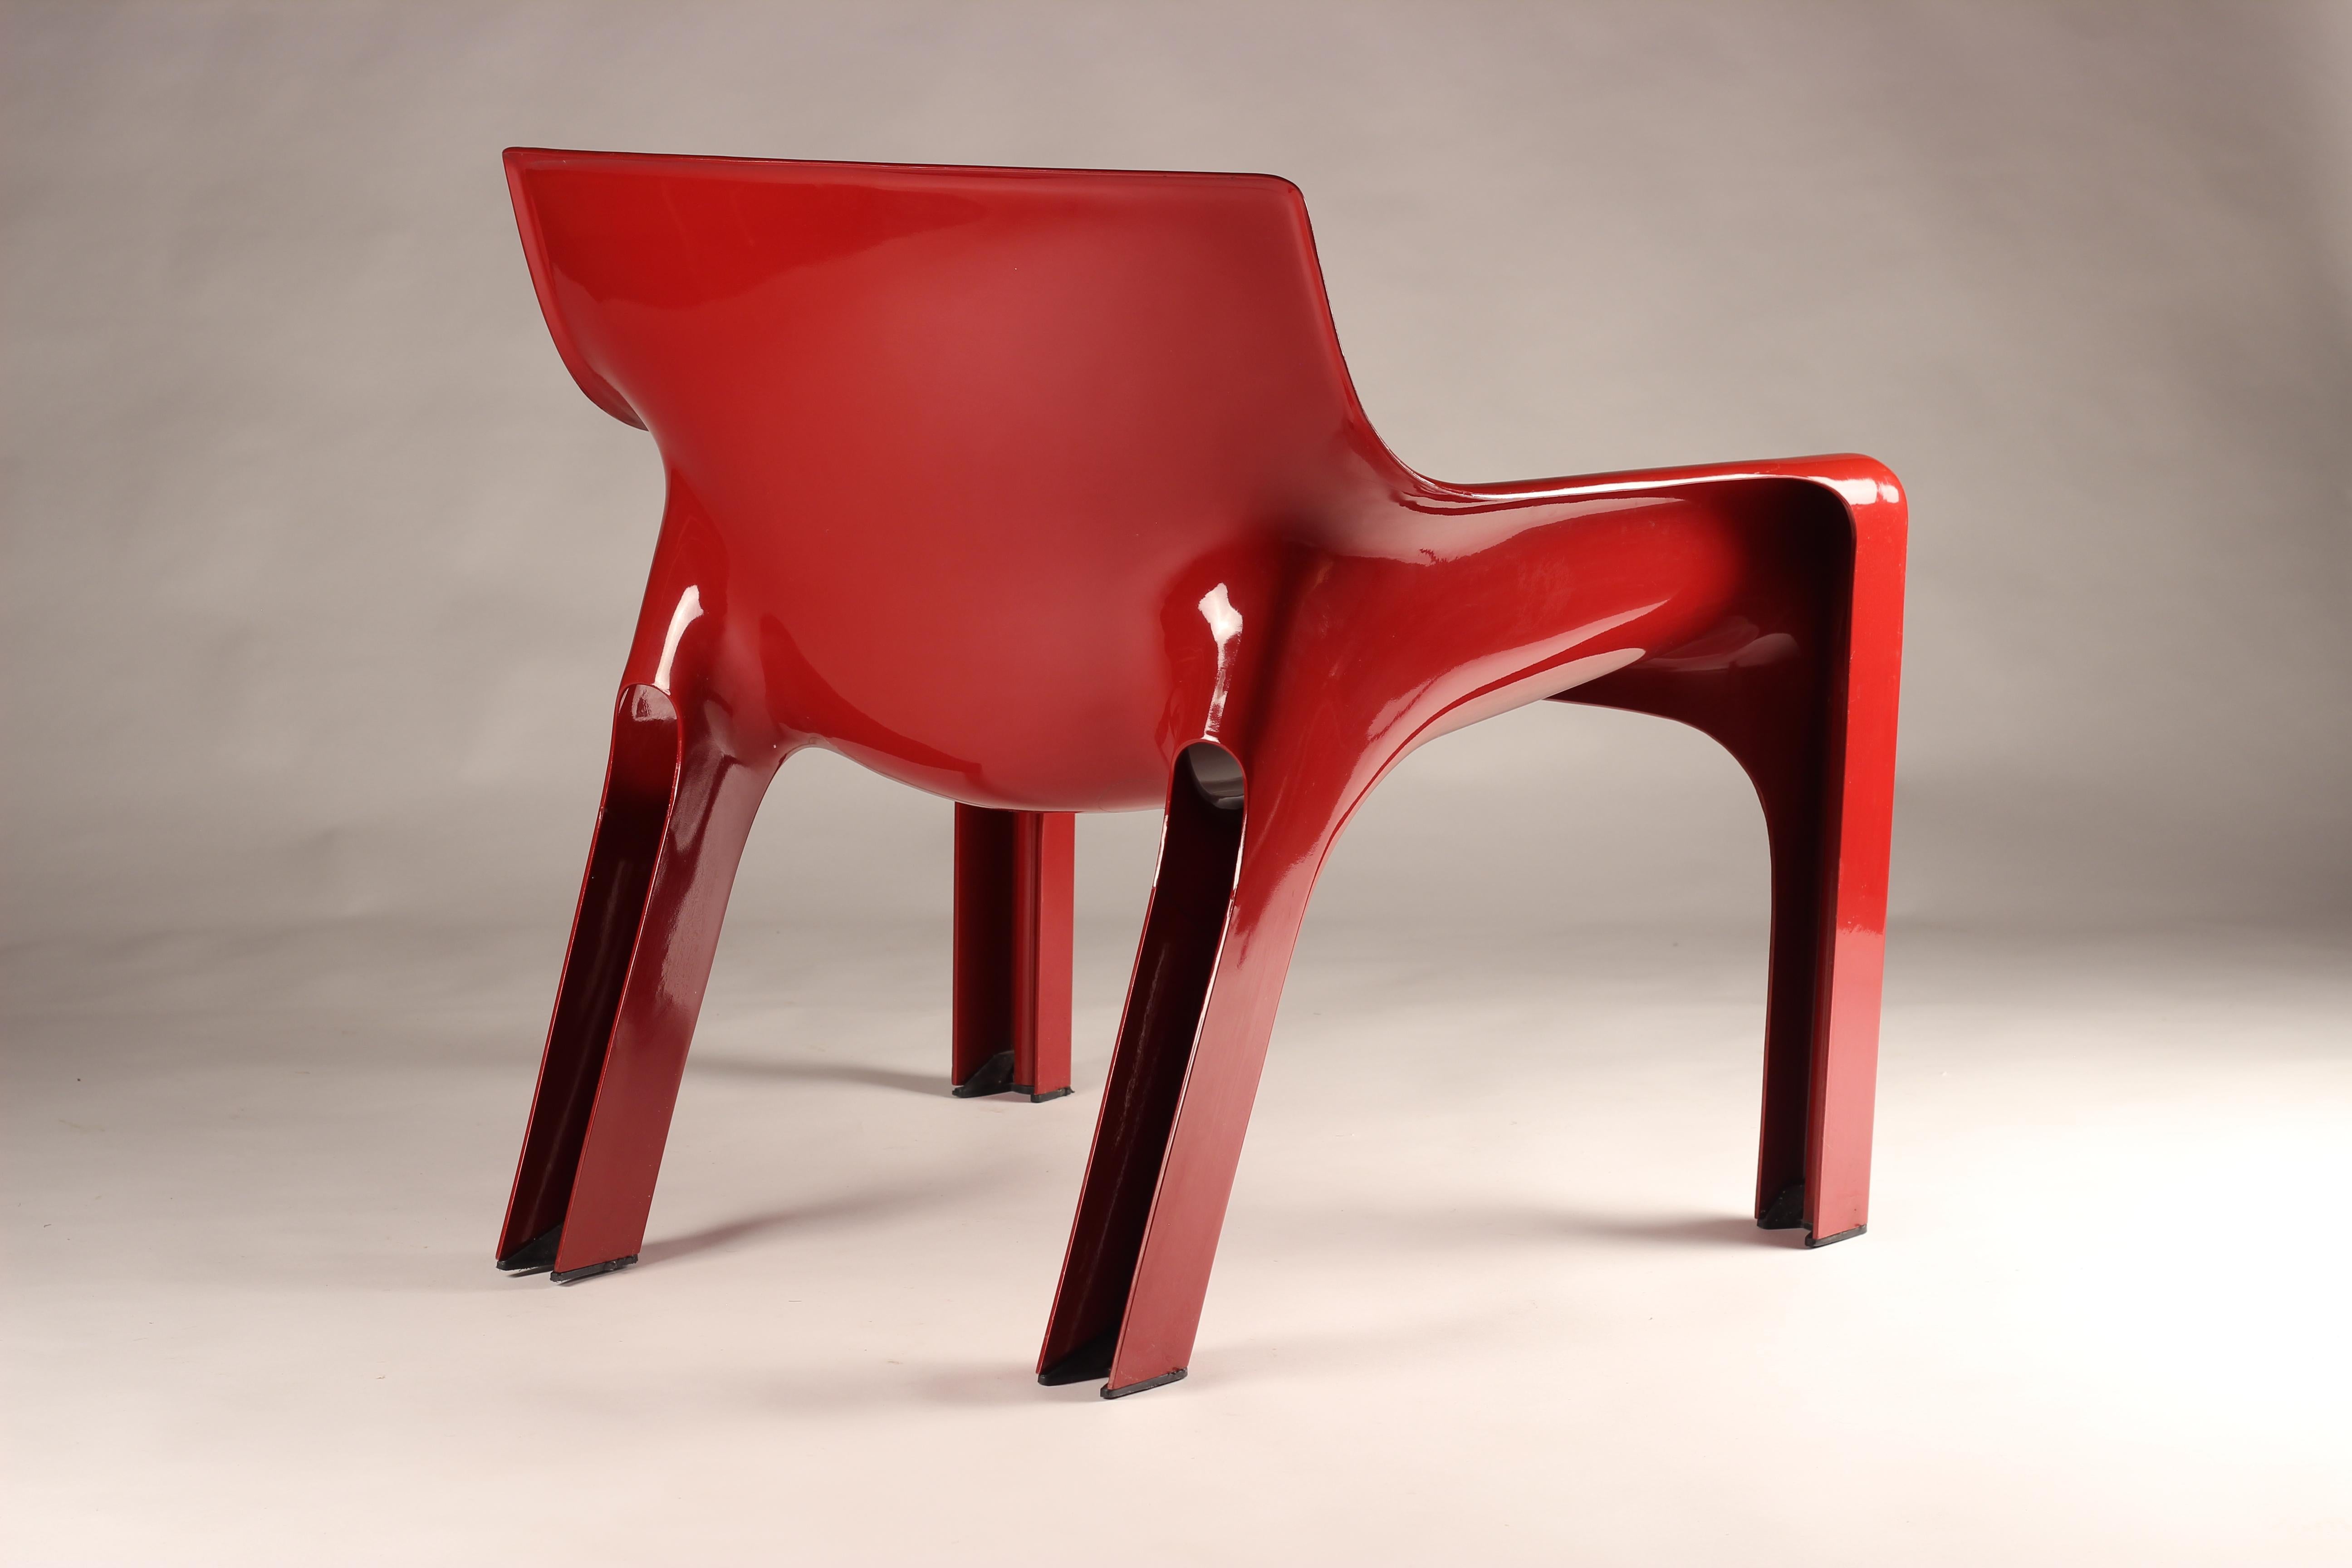 Plastic Pair of Red Vicario Lounge Chairs Design by Vico Magistretti Made by Artemide